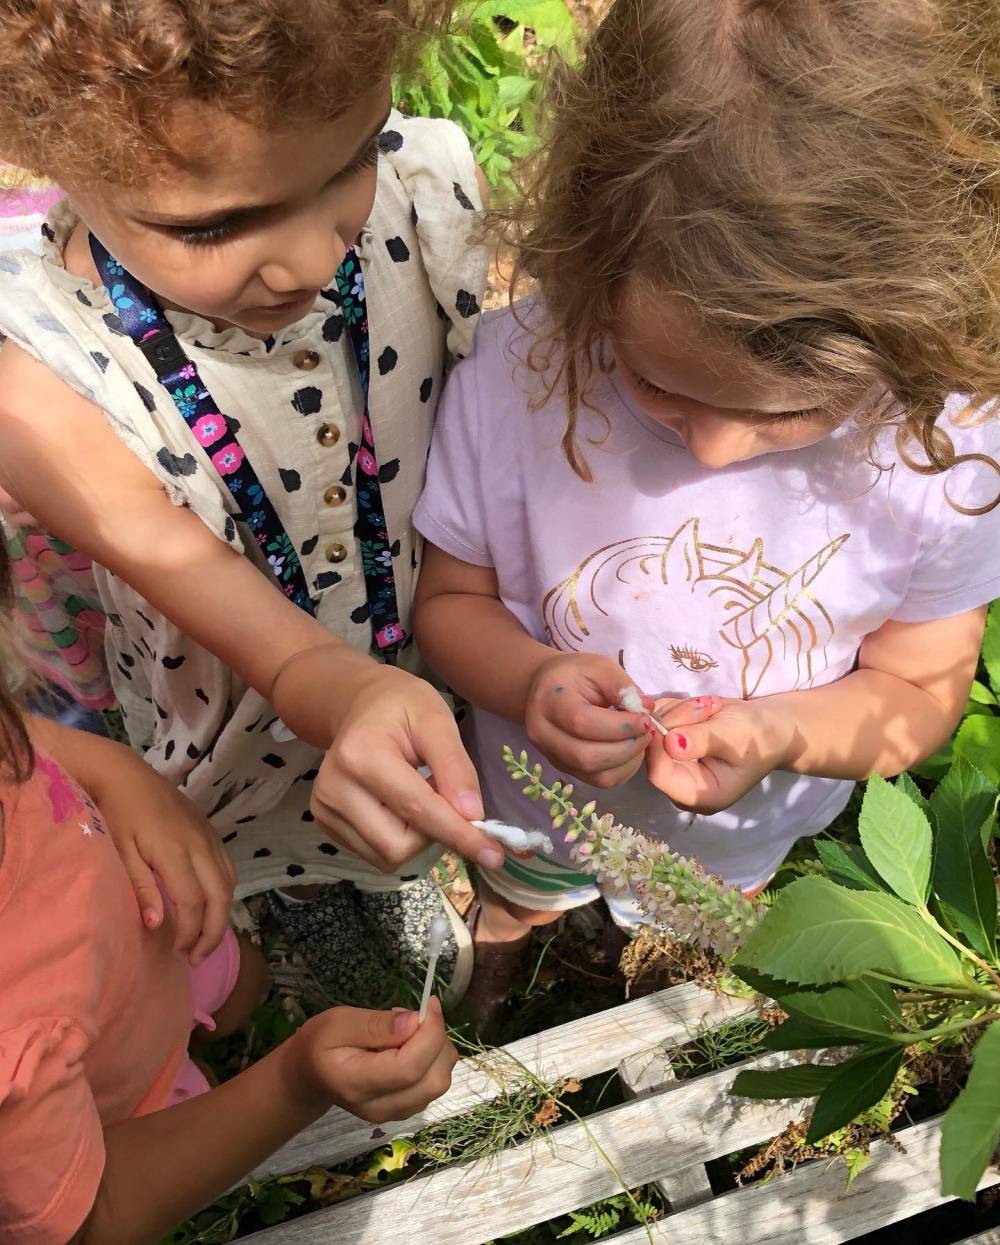 TOP NEW JERSEY SCIENCE CAMP: Cora Hartshorn Nature Discovery  is a Top Science Summer Camp located in Short Hills New Jersey offering many fun and enriching Science and other camp programs. 